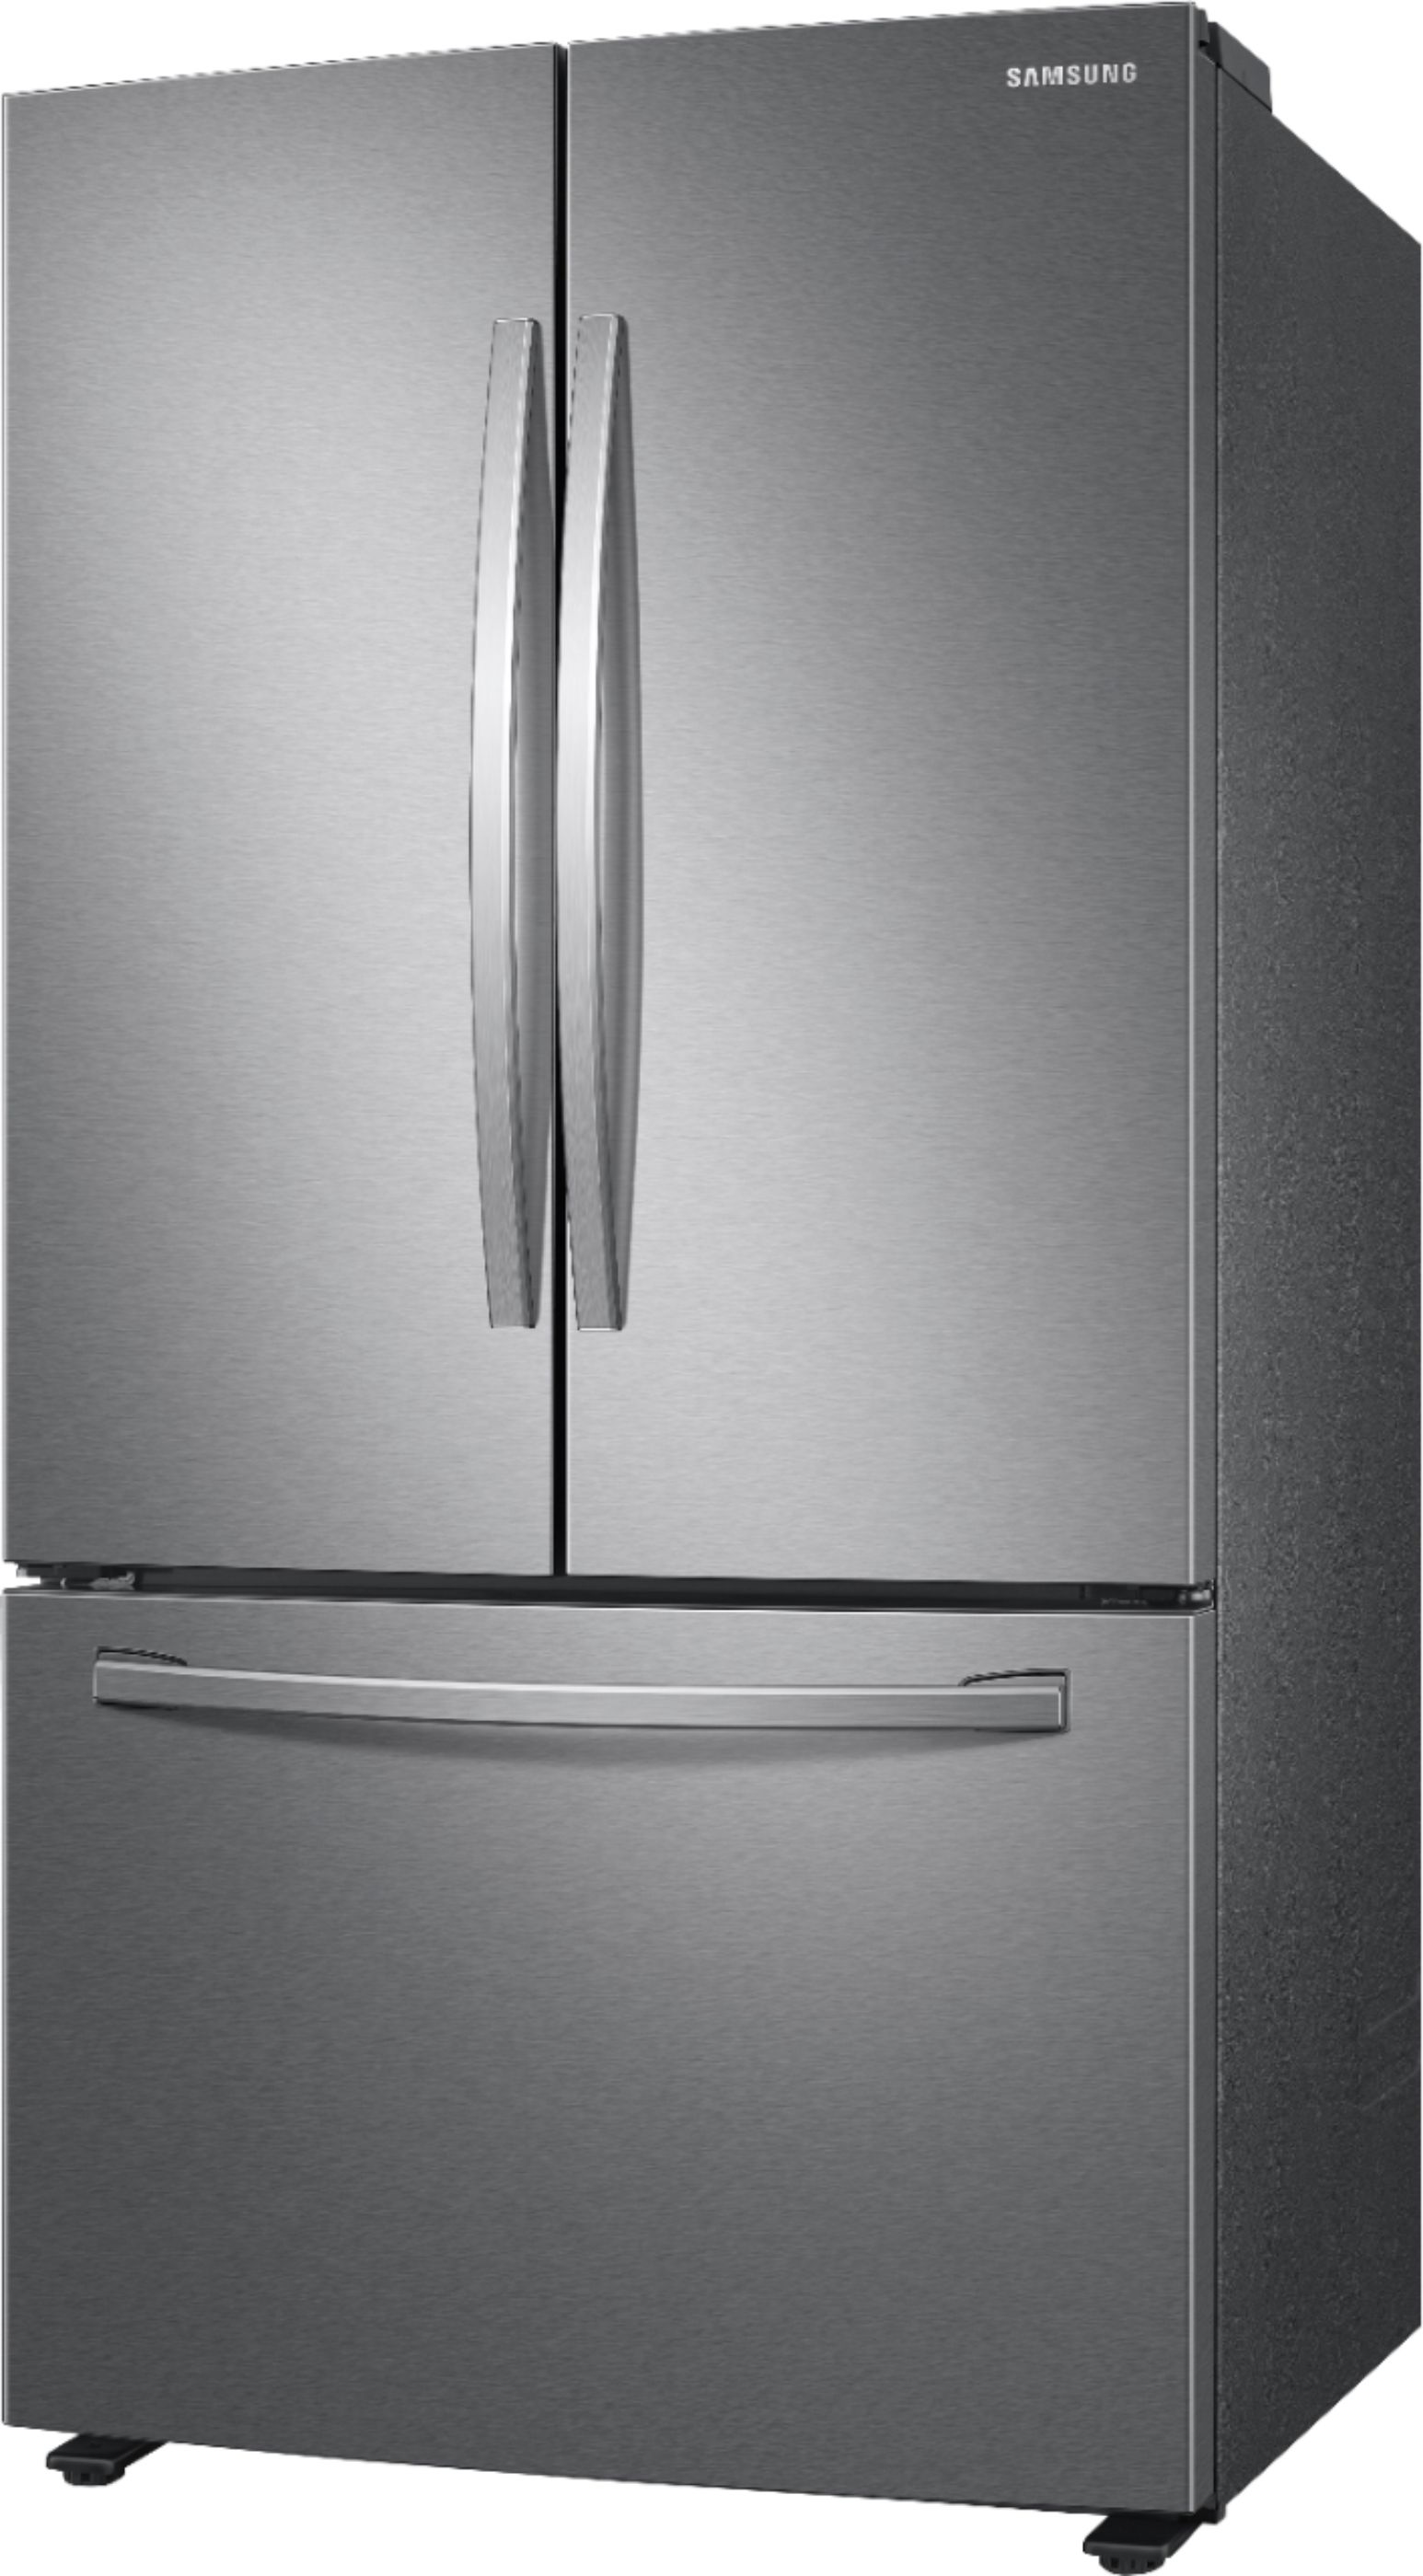 Left View: Samsung - 19.5 cu. ft. 3-Door French Door Refrigerator with Wi-Fi - White